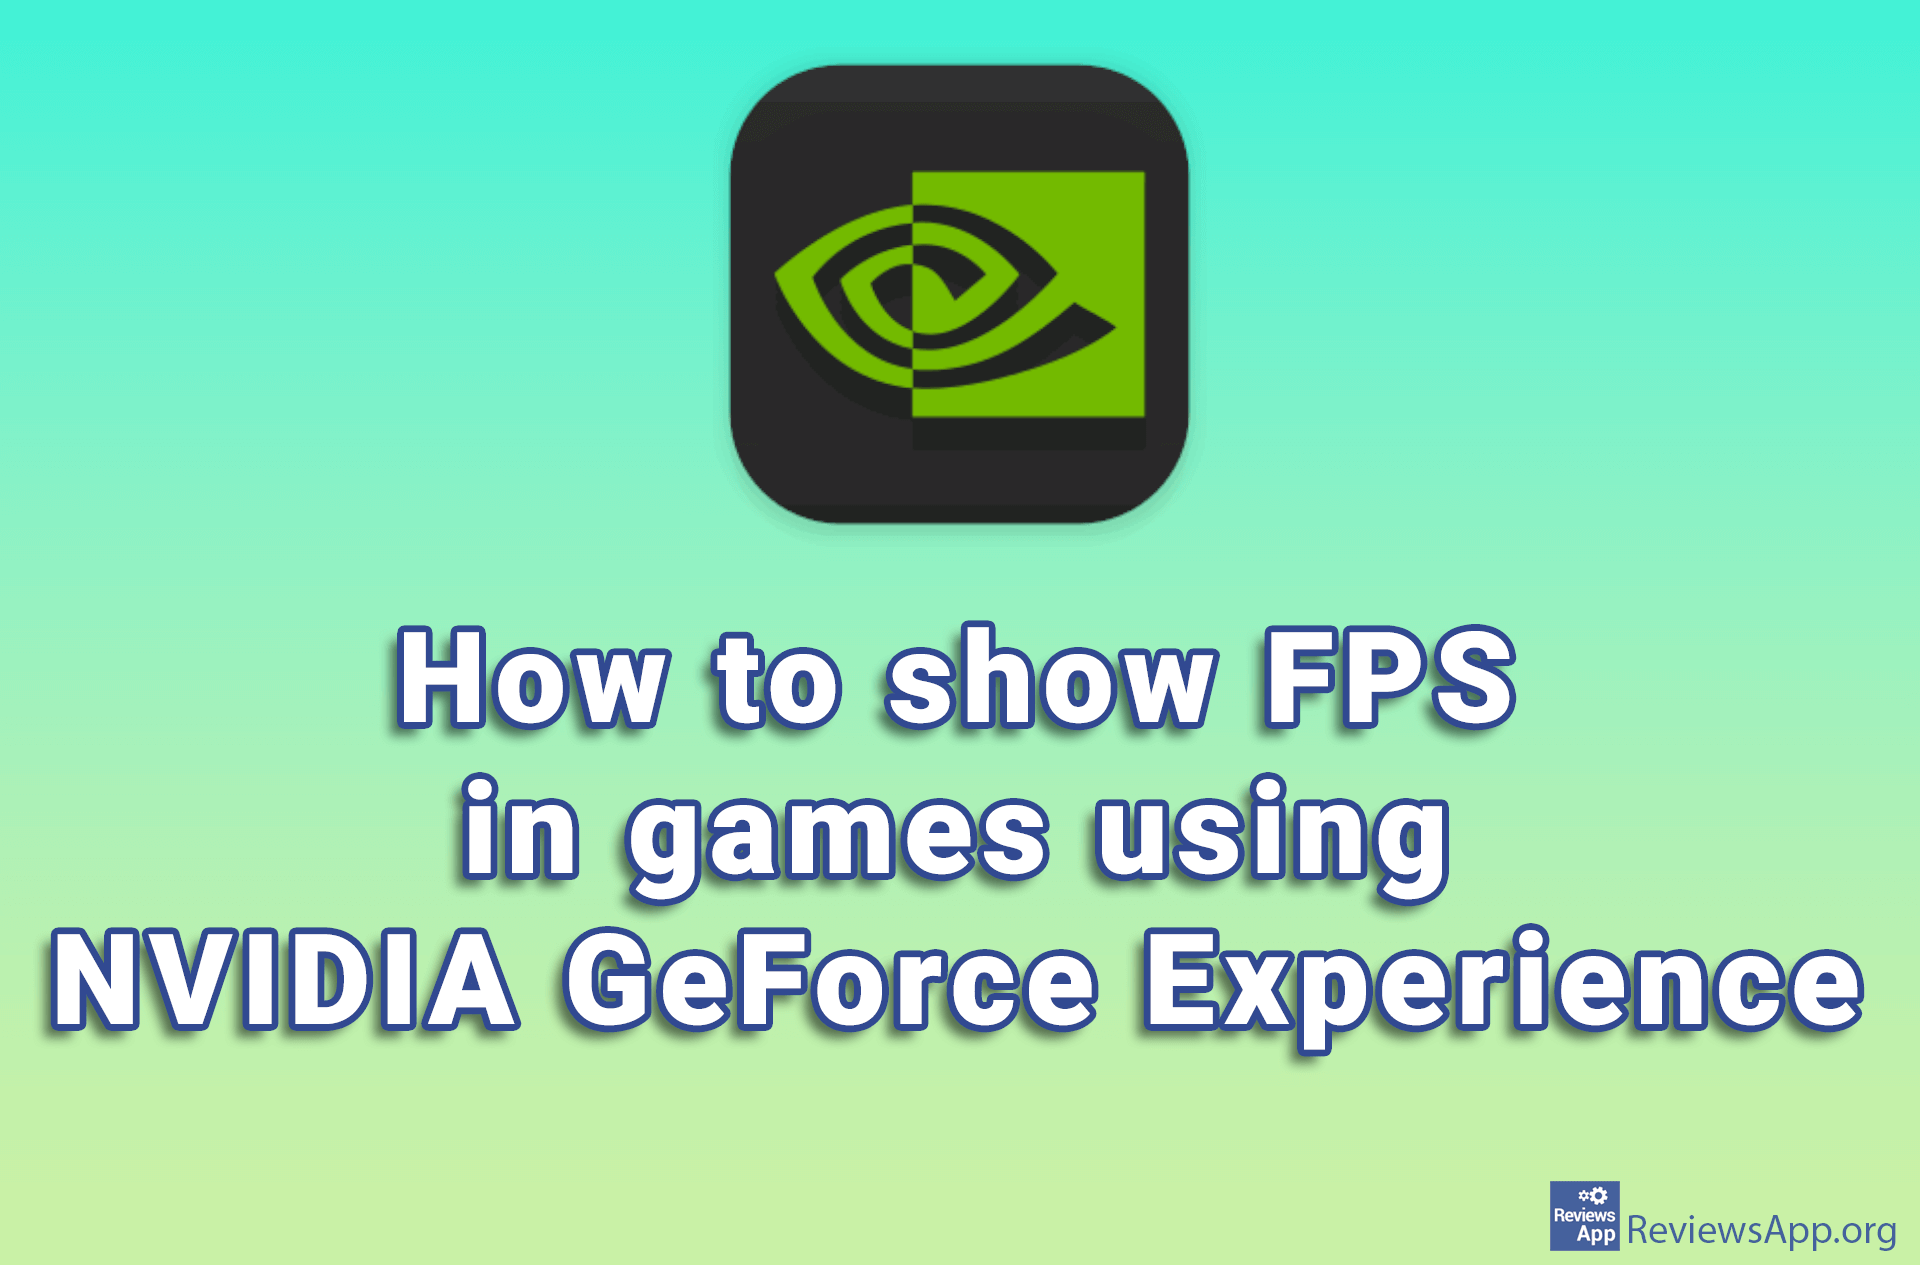 How to show FPS in games using NVIDIA GeForce Experience